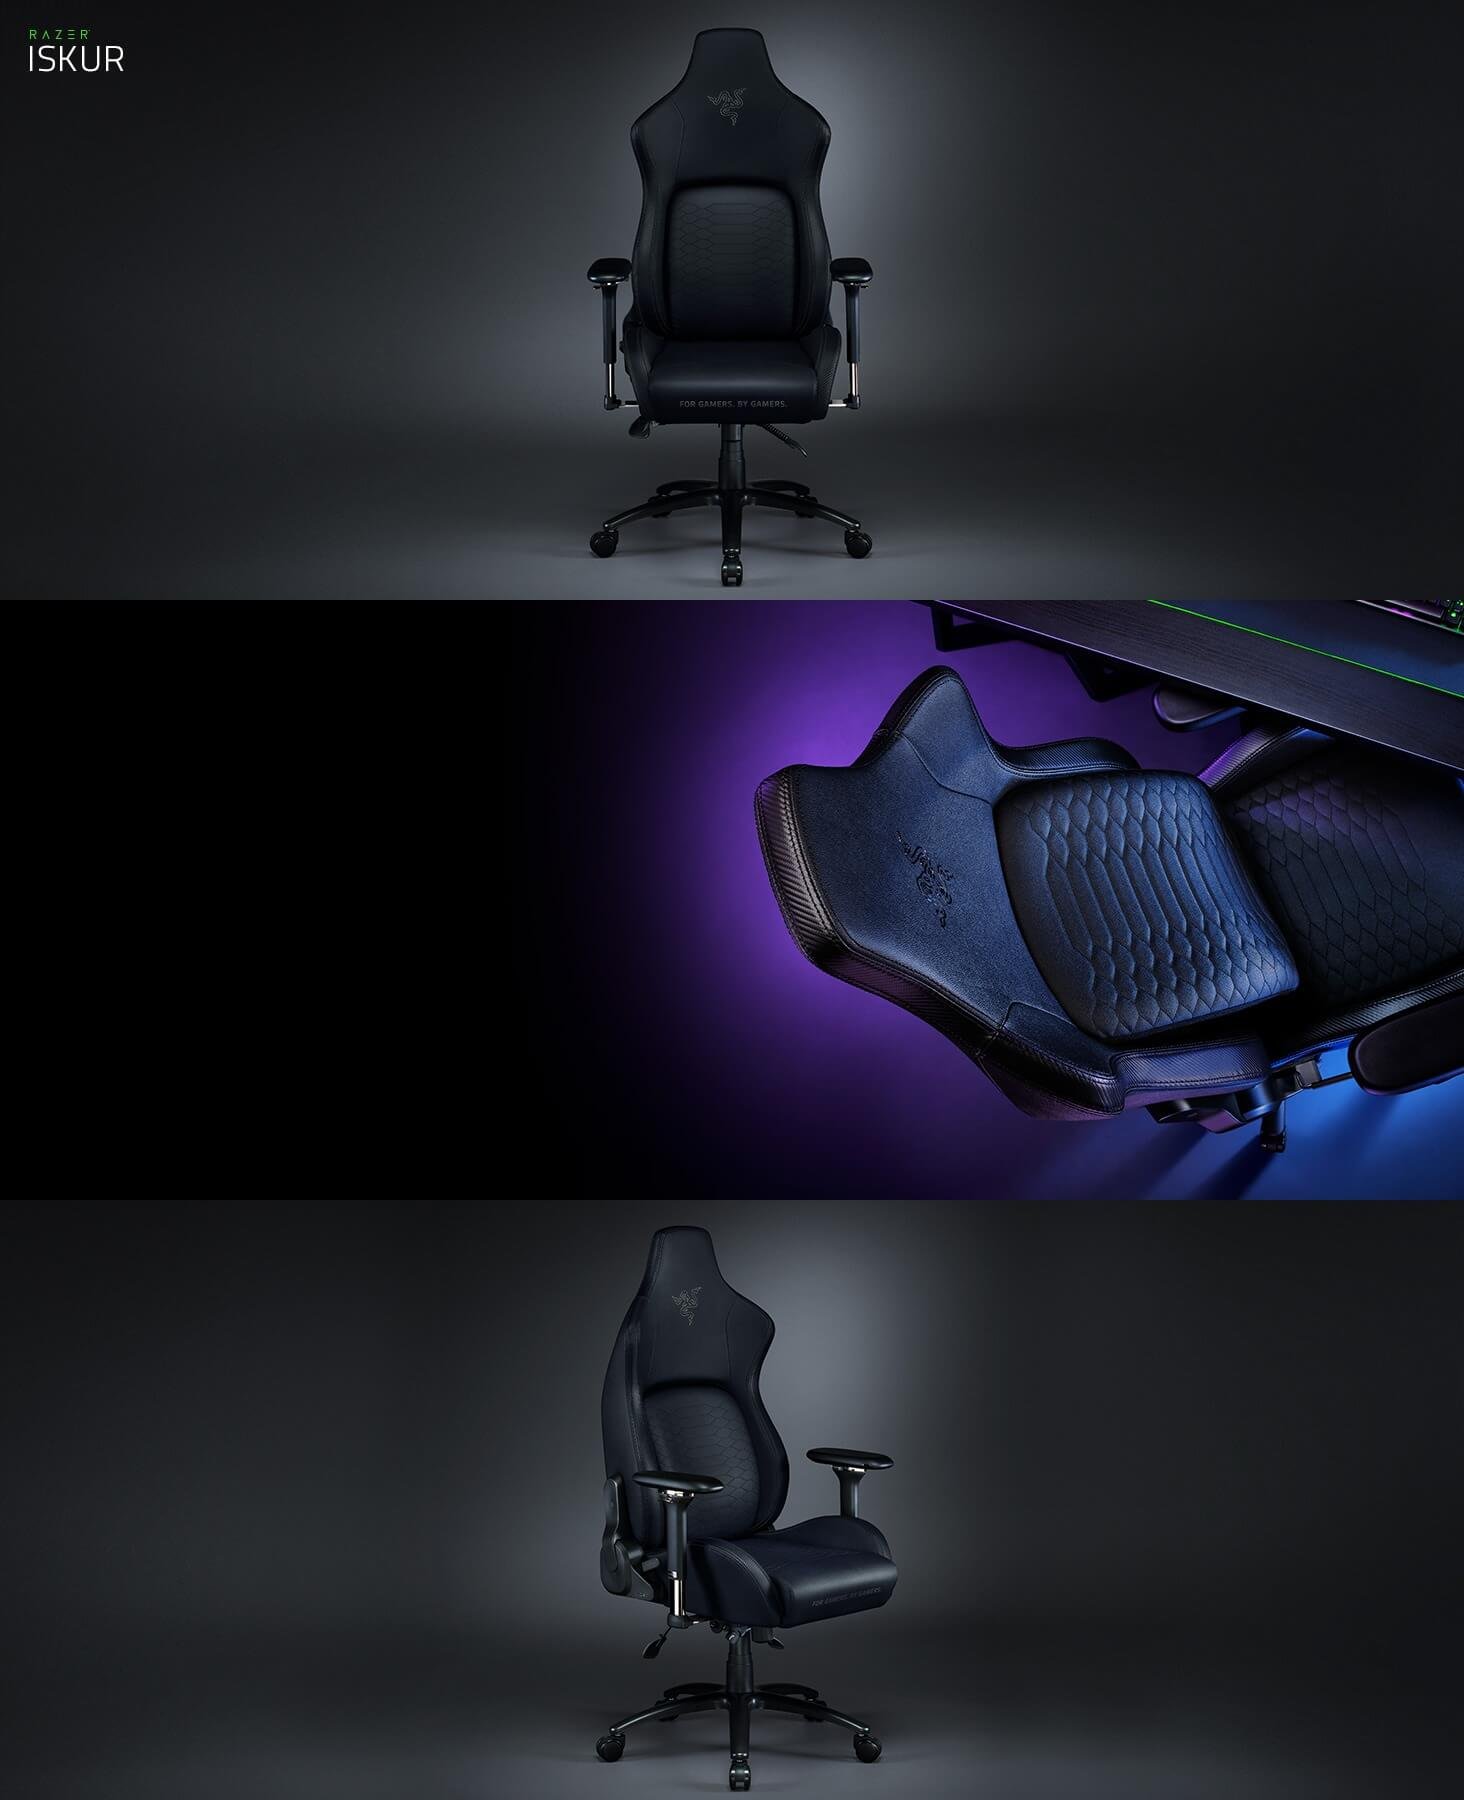 Razer Iskur Gaming Chair With Built in Lumbar Support Review 1